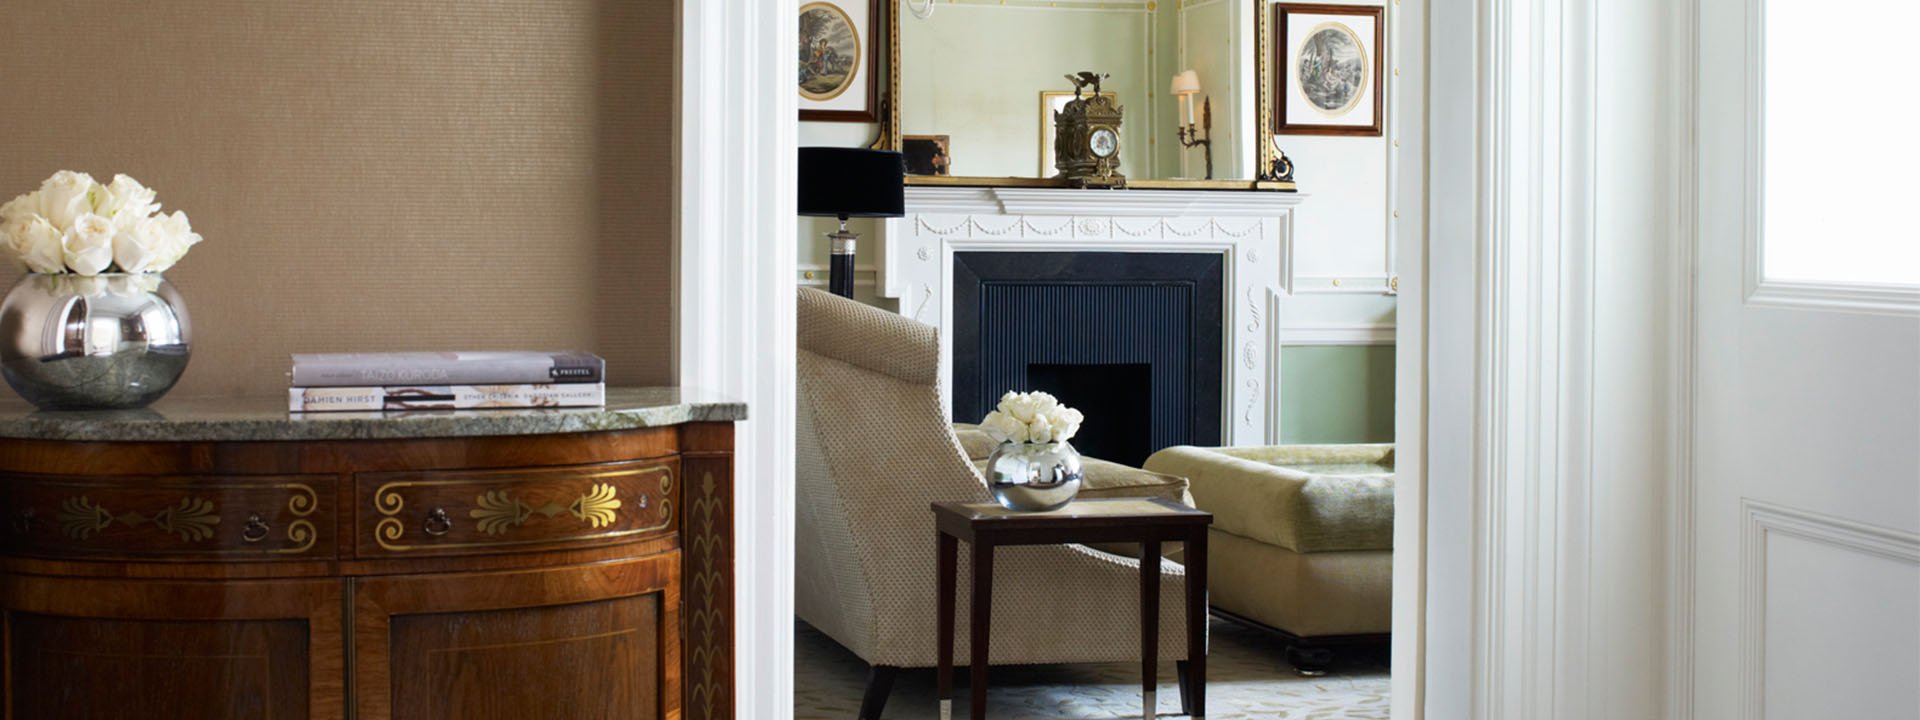 View of details and rooms from The Connaught suite, and the original ornate fireplace.